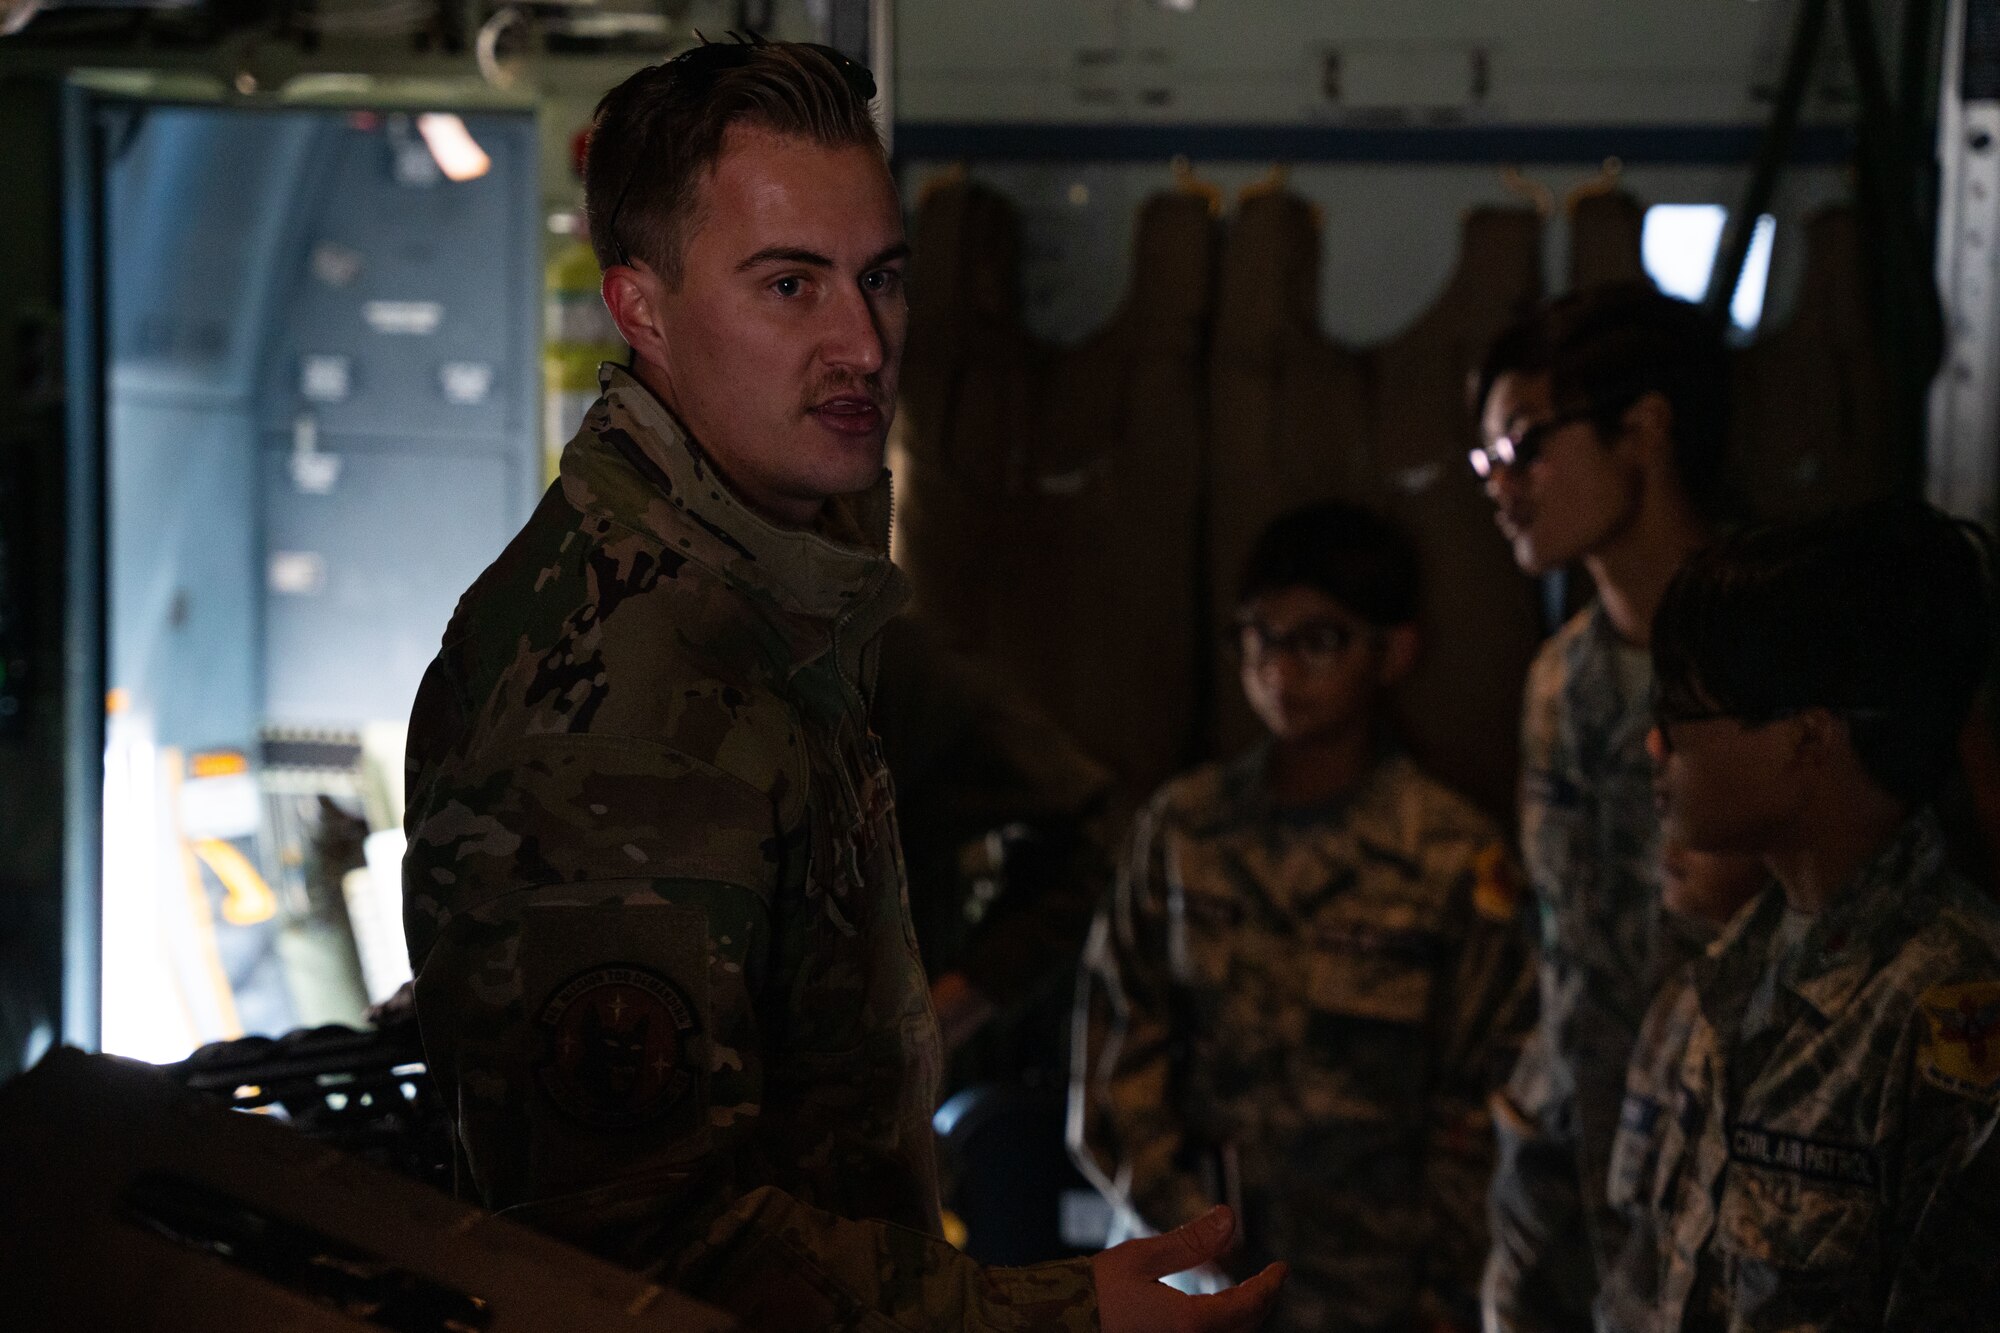 A man in military uniform briefs a group of young adults in military uniform while inside a military aircraft.